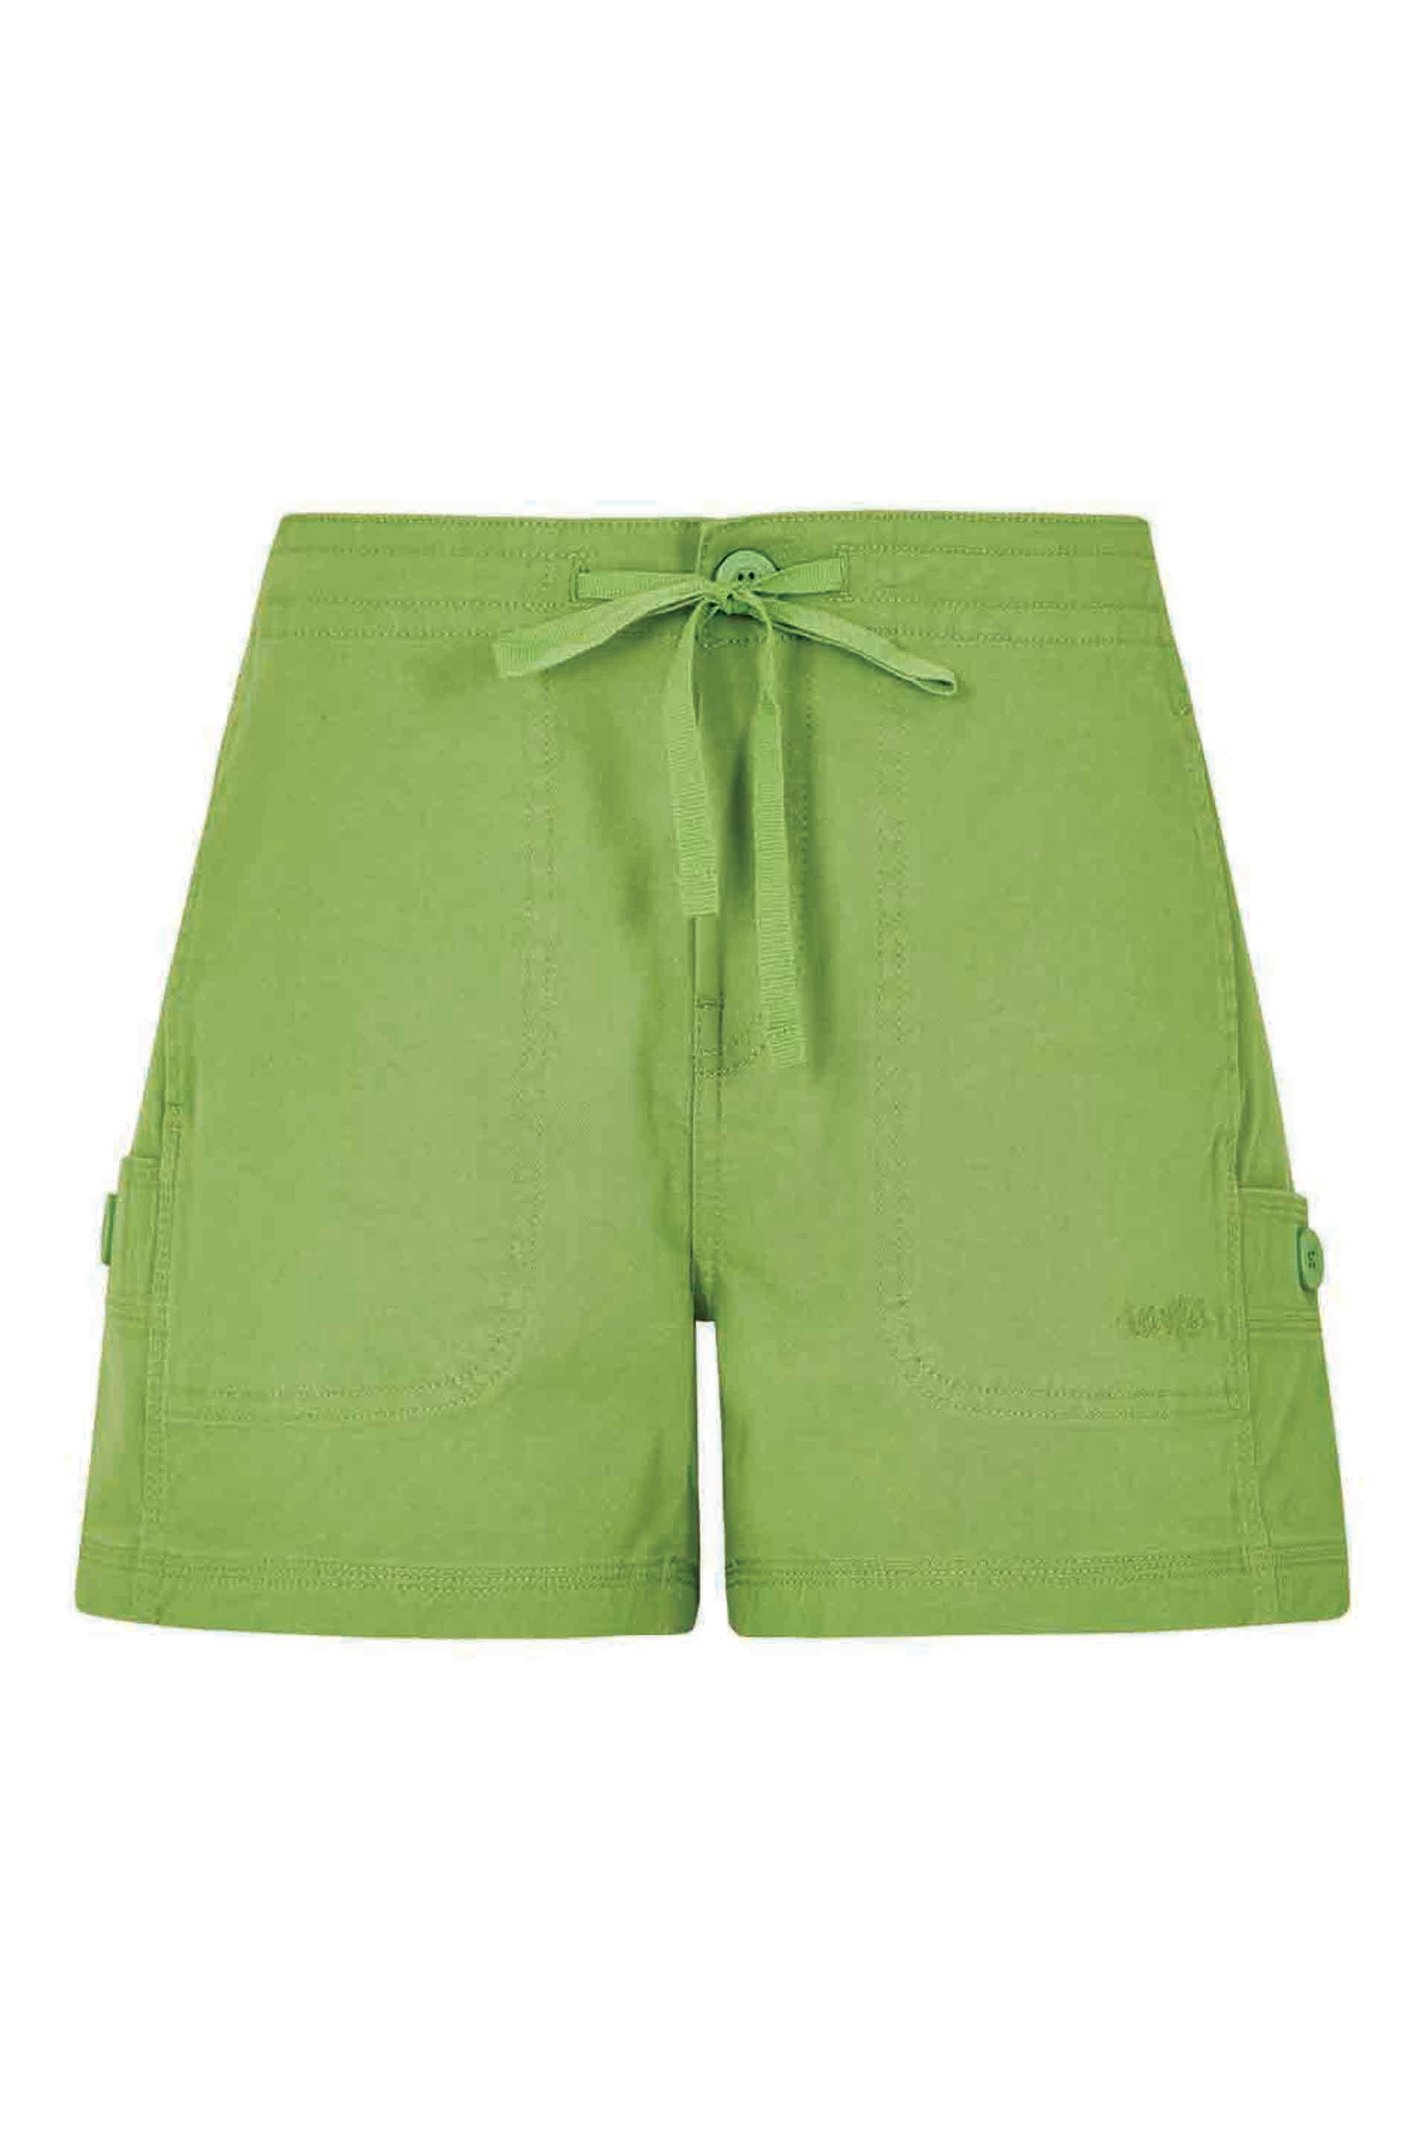 Weird Fish Willoughby Summer Shorts Kiwi Size 8